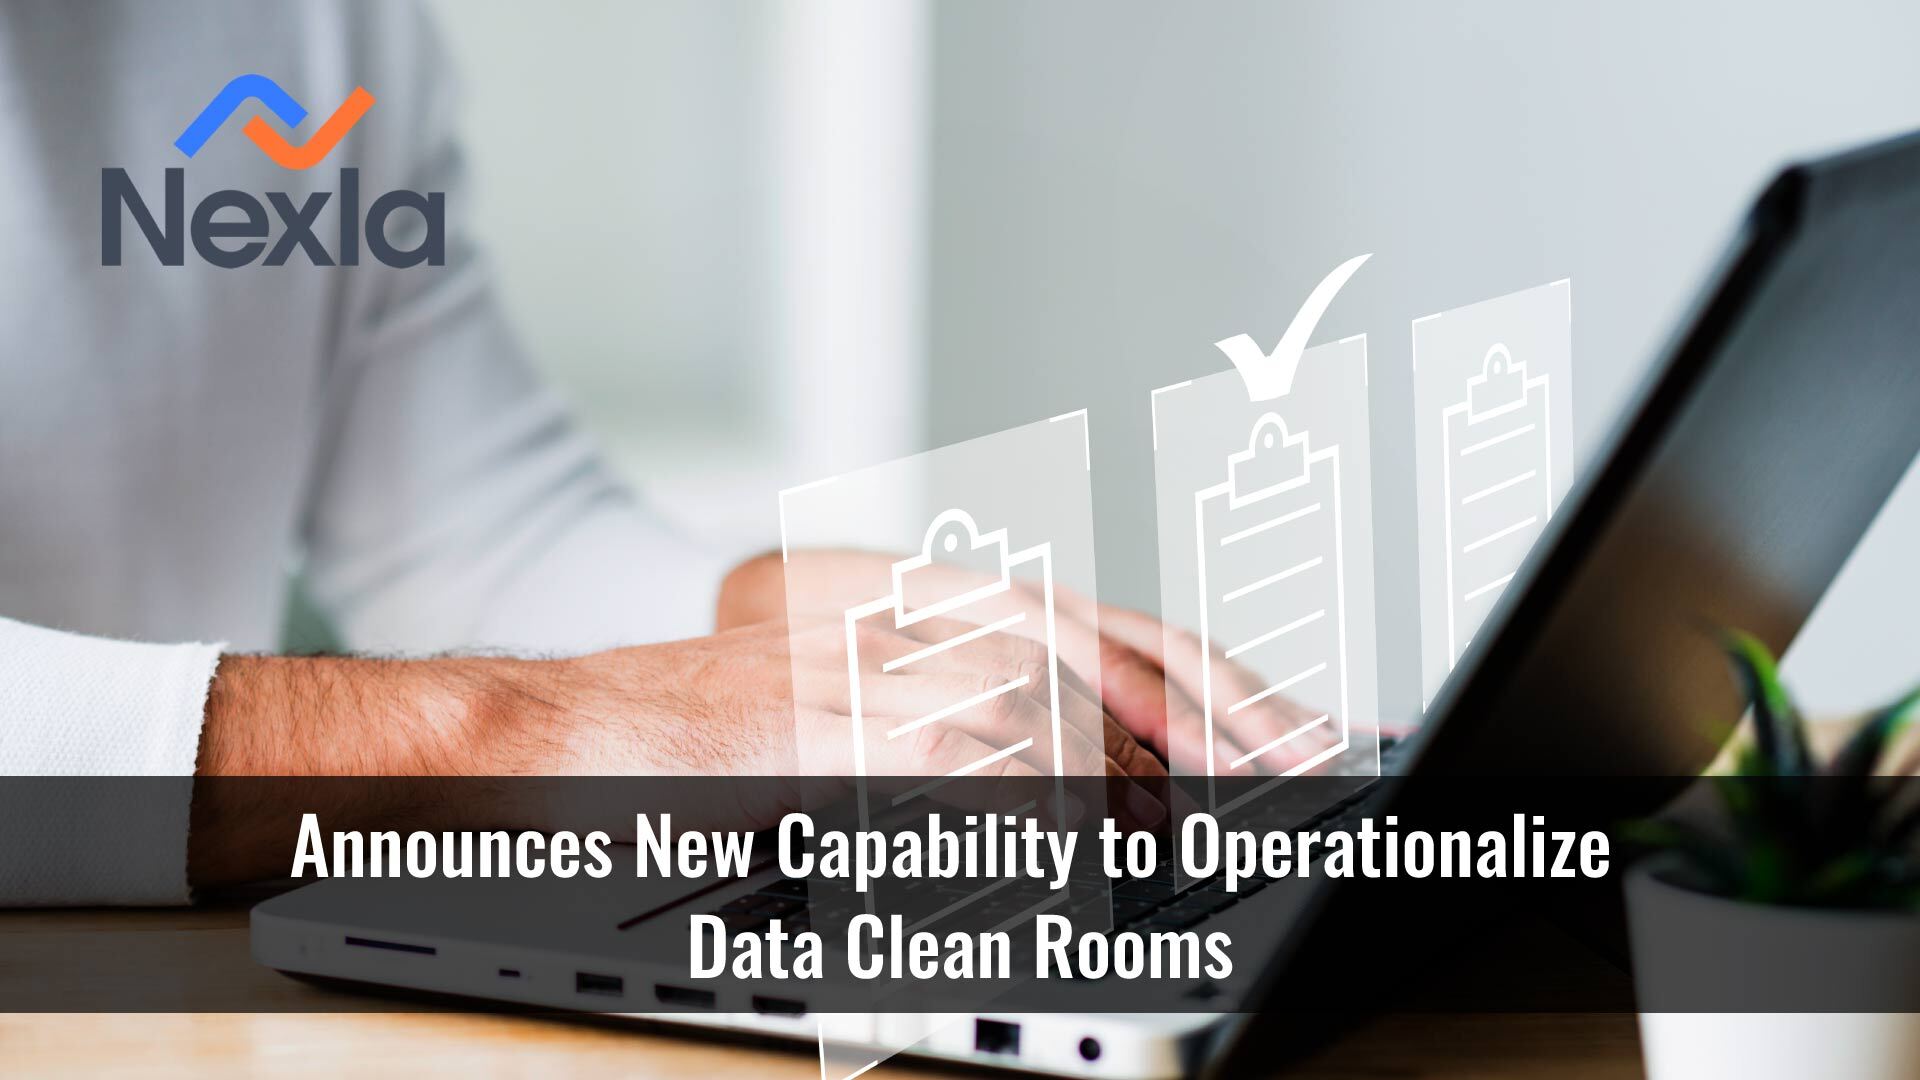 Nexla Announces New Capability to Operationalize Data Clean Rooms